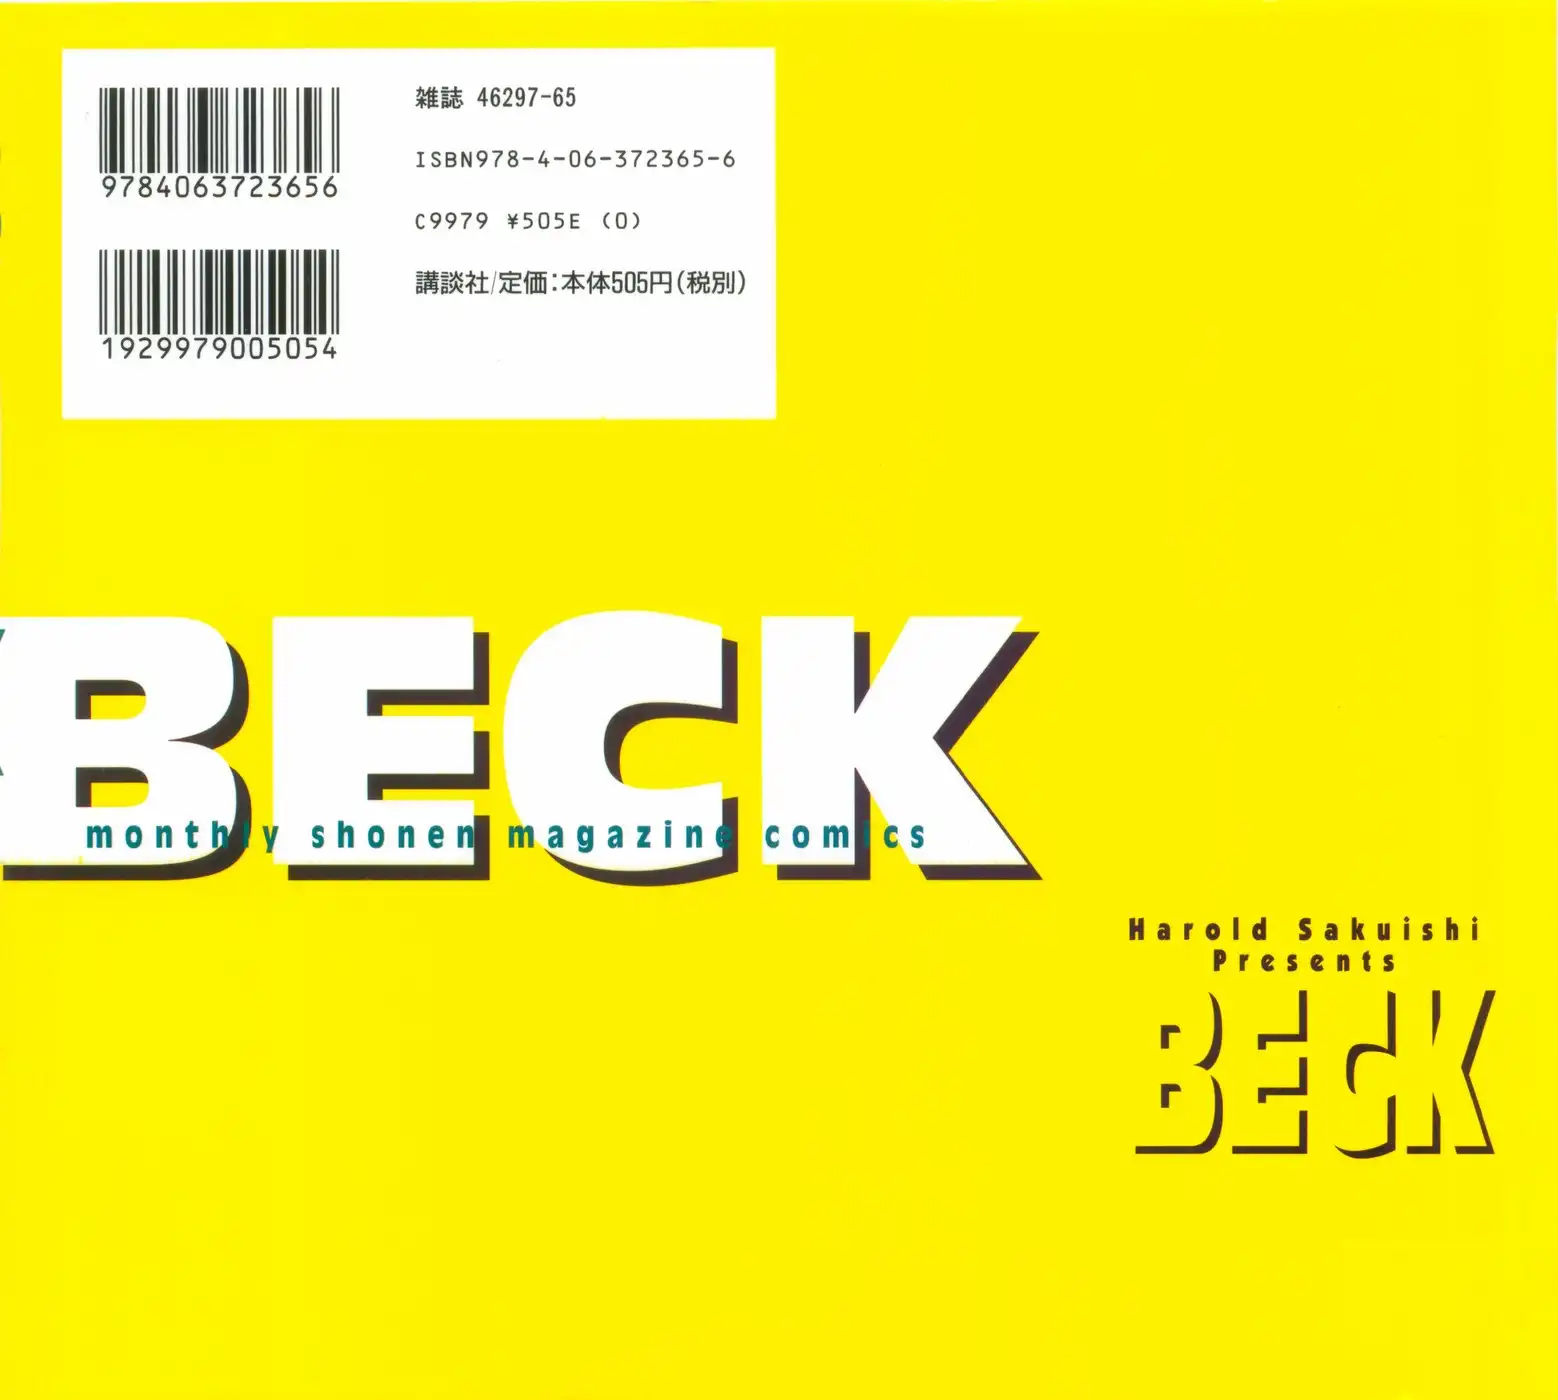 Beck Chapter 92